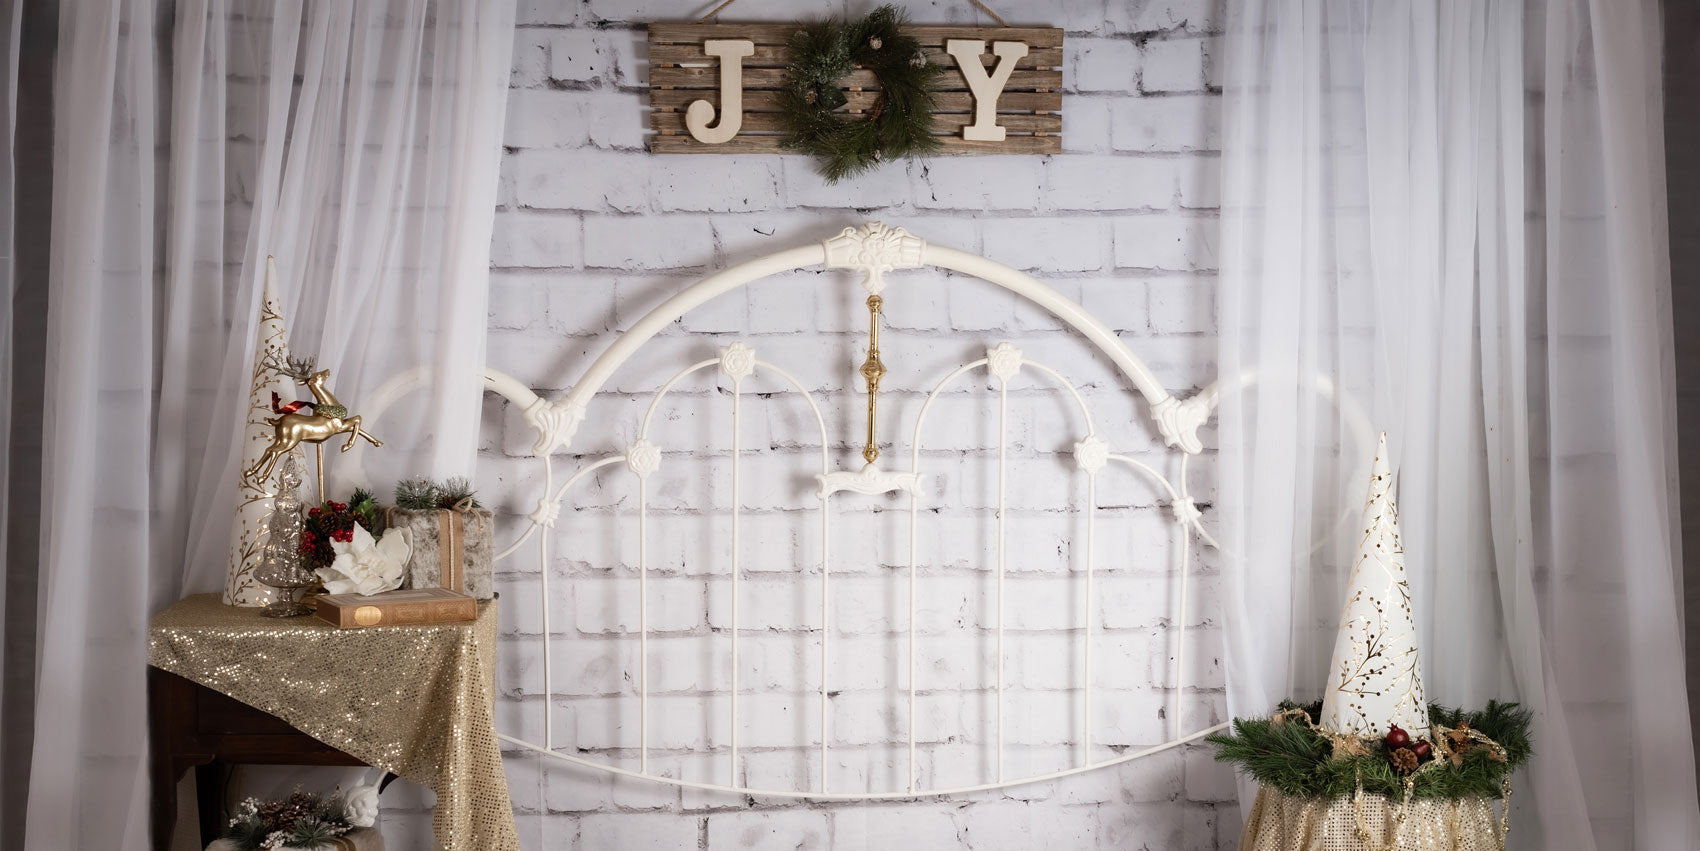 Kate Christmas White Headboard Backdrop Designed By Angela Marie Photography